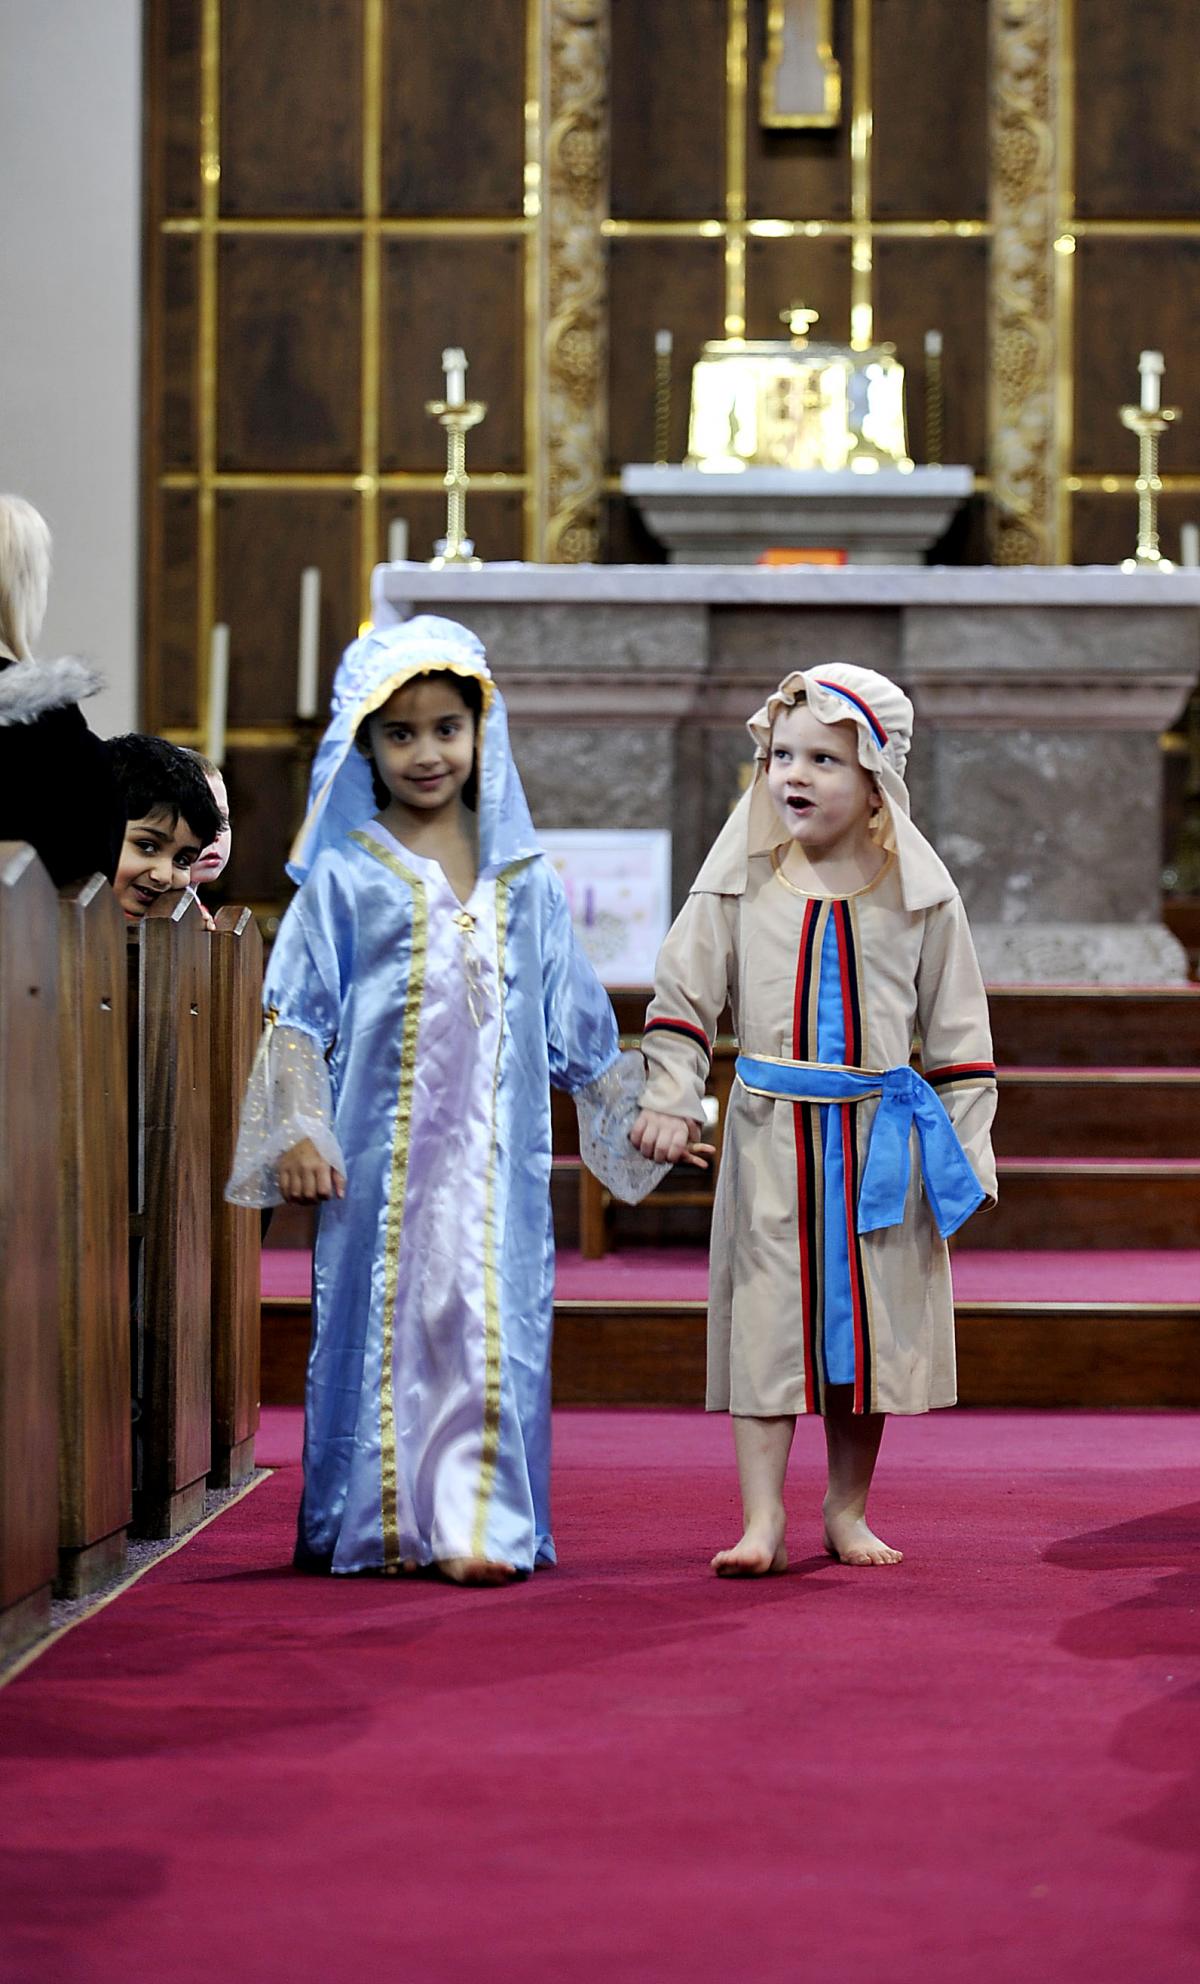 Taking part in St Clare's Catholic Primary School Nativity are, from the left, Alyssa Koshal-Mahmood and Daniel Liddemore